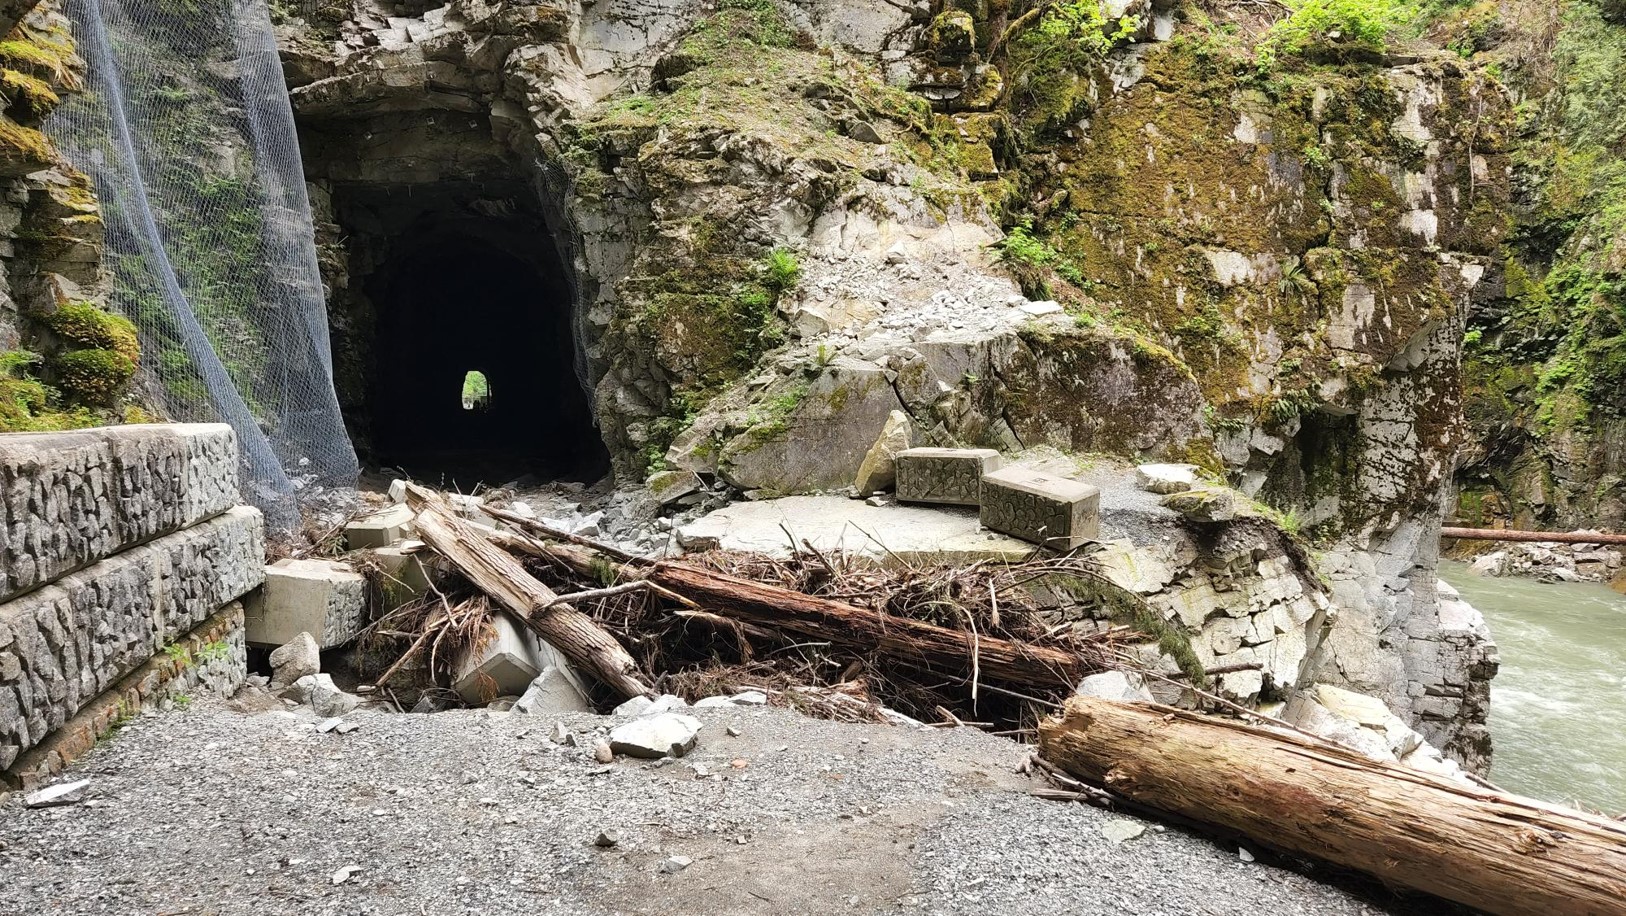 Damage caused by woody debris at The Othello Tunnels